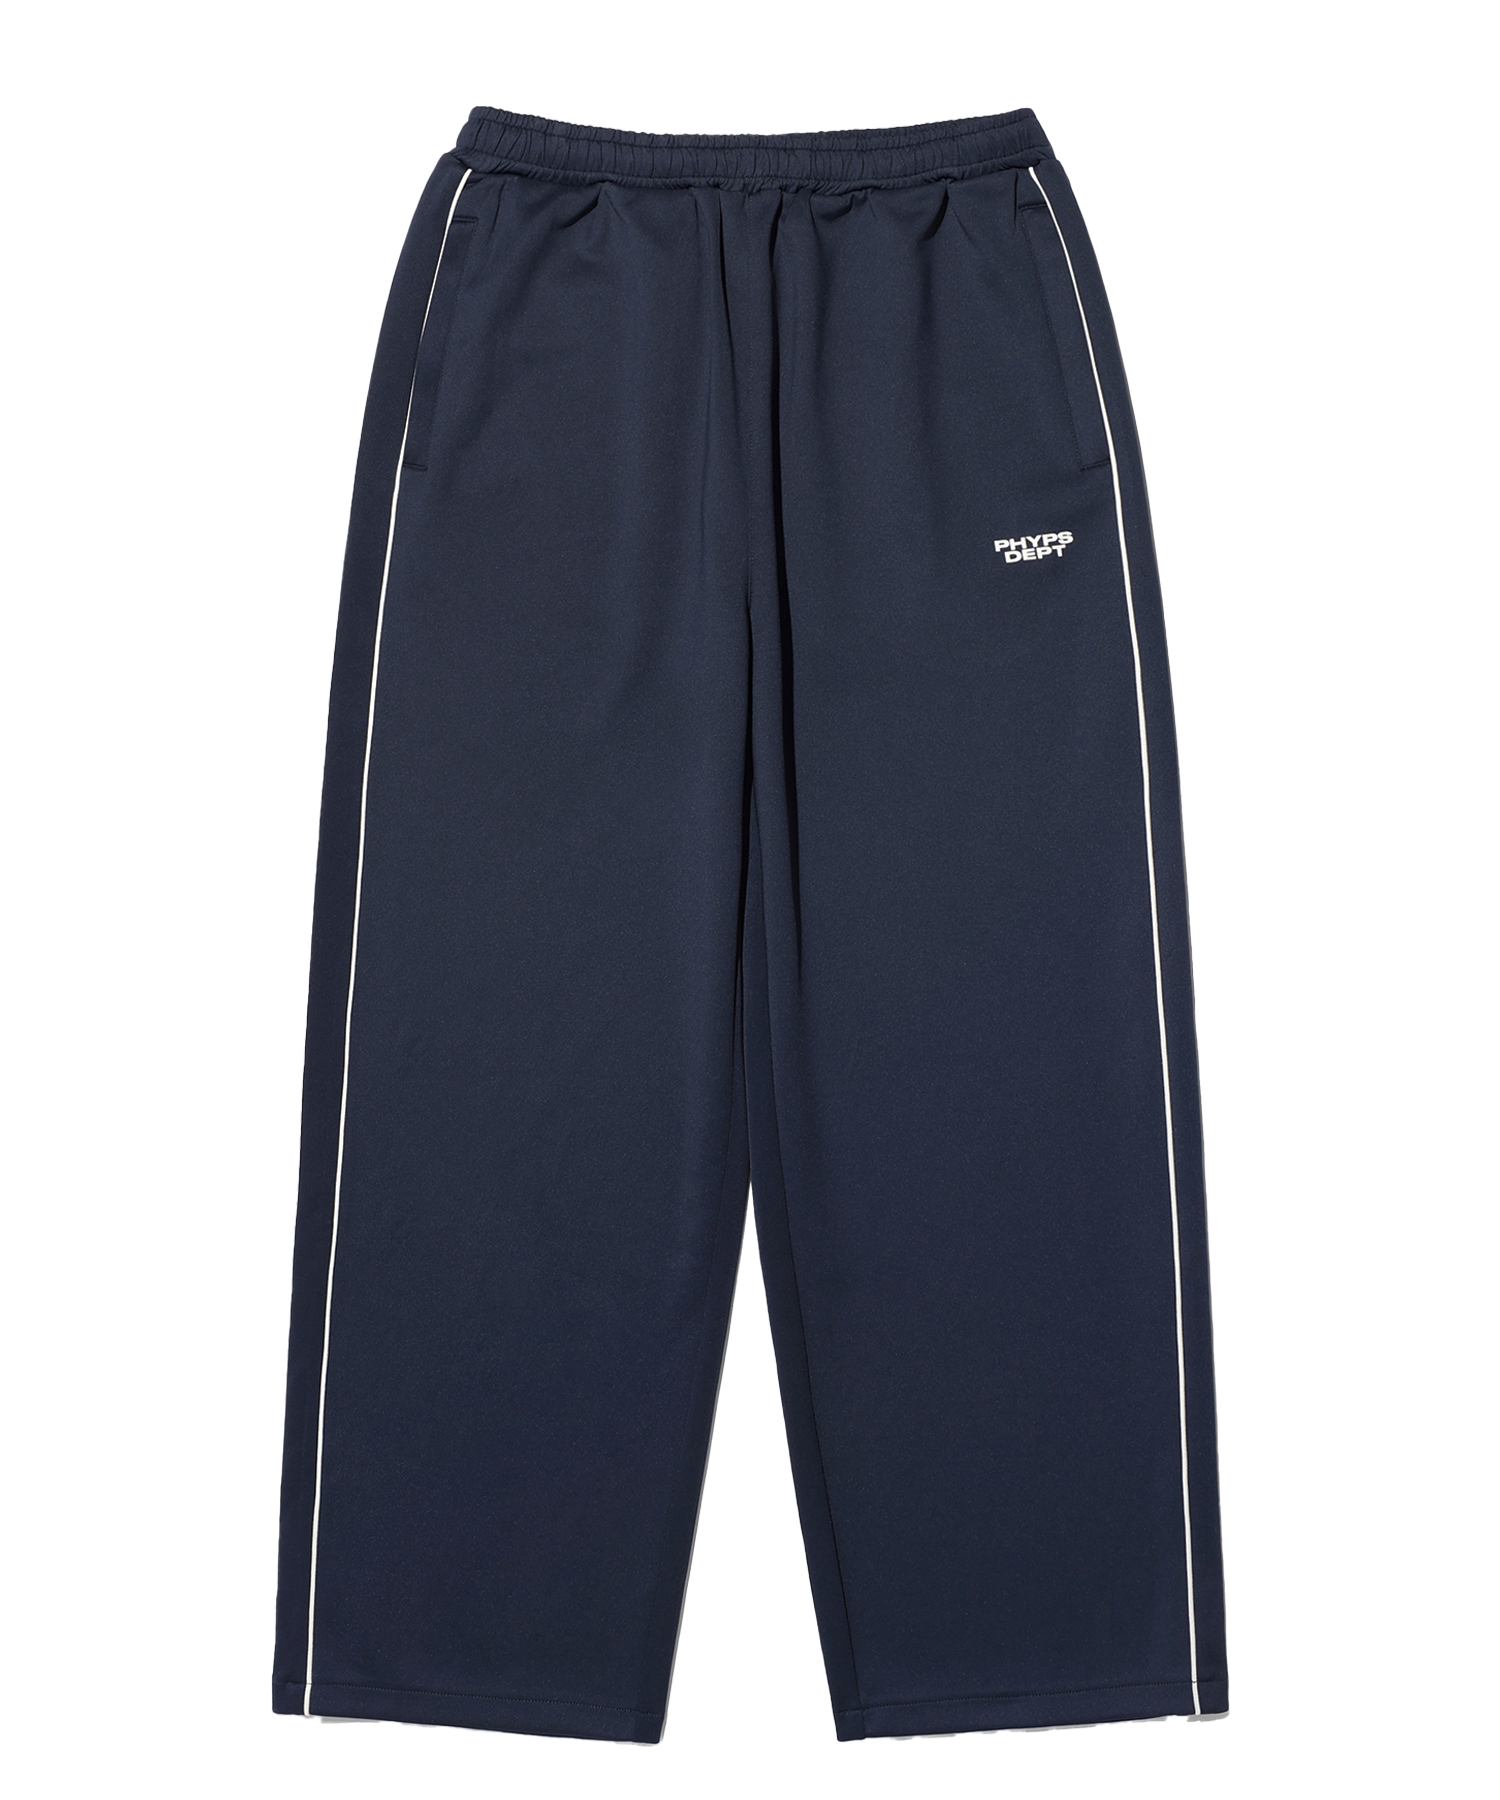 PIPING JERSEY TRACK PANTS NAVY